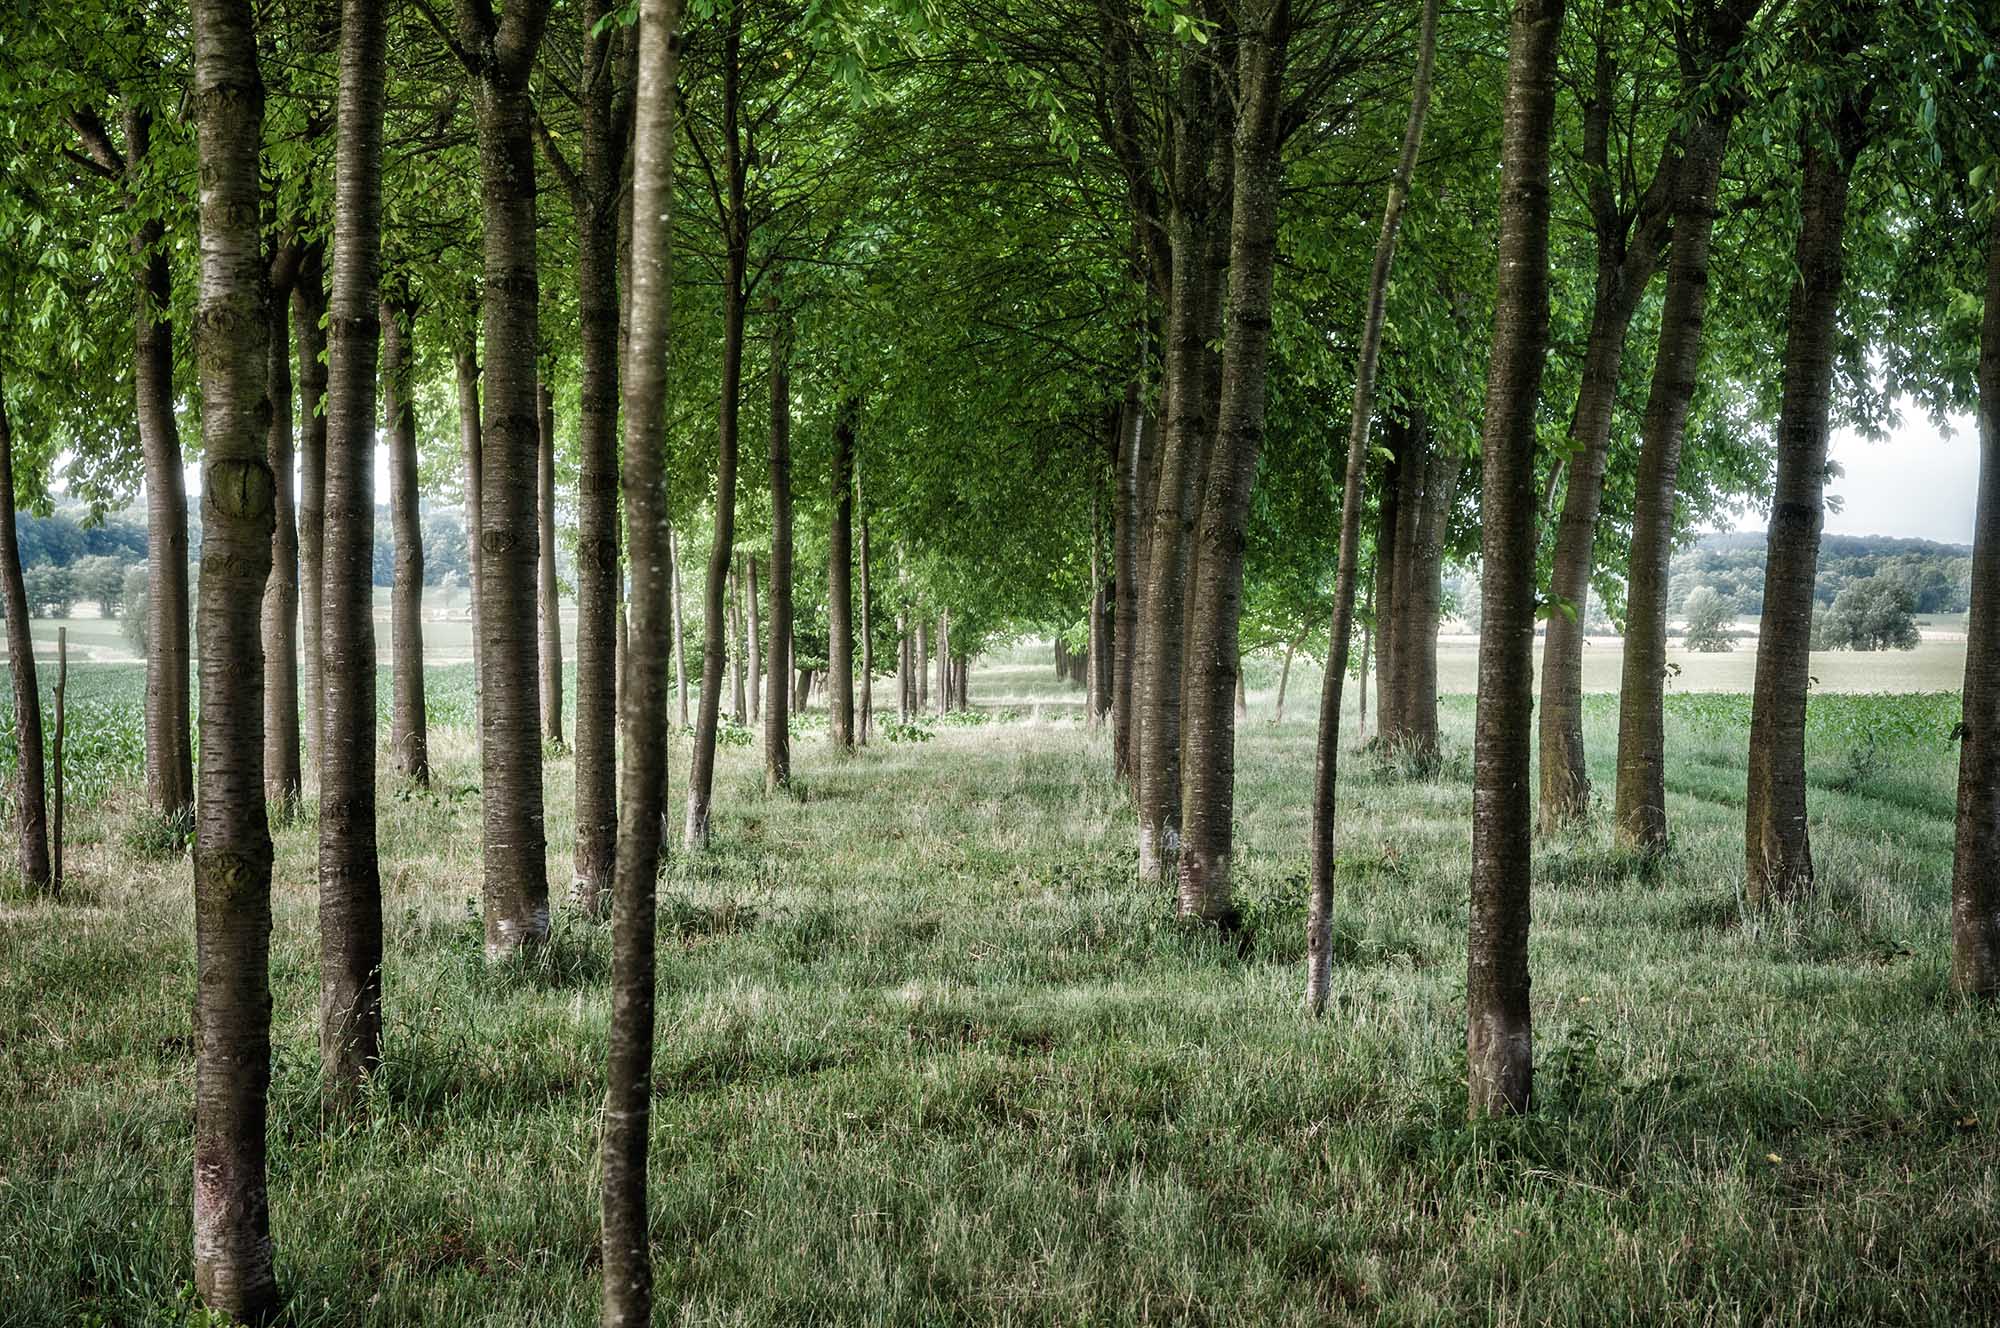 trees lined up between fields